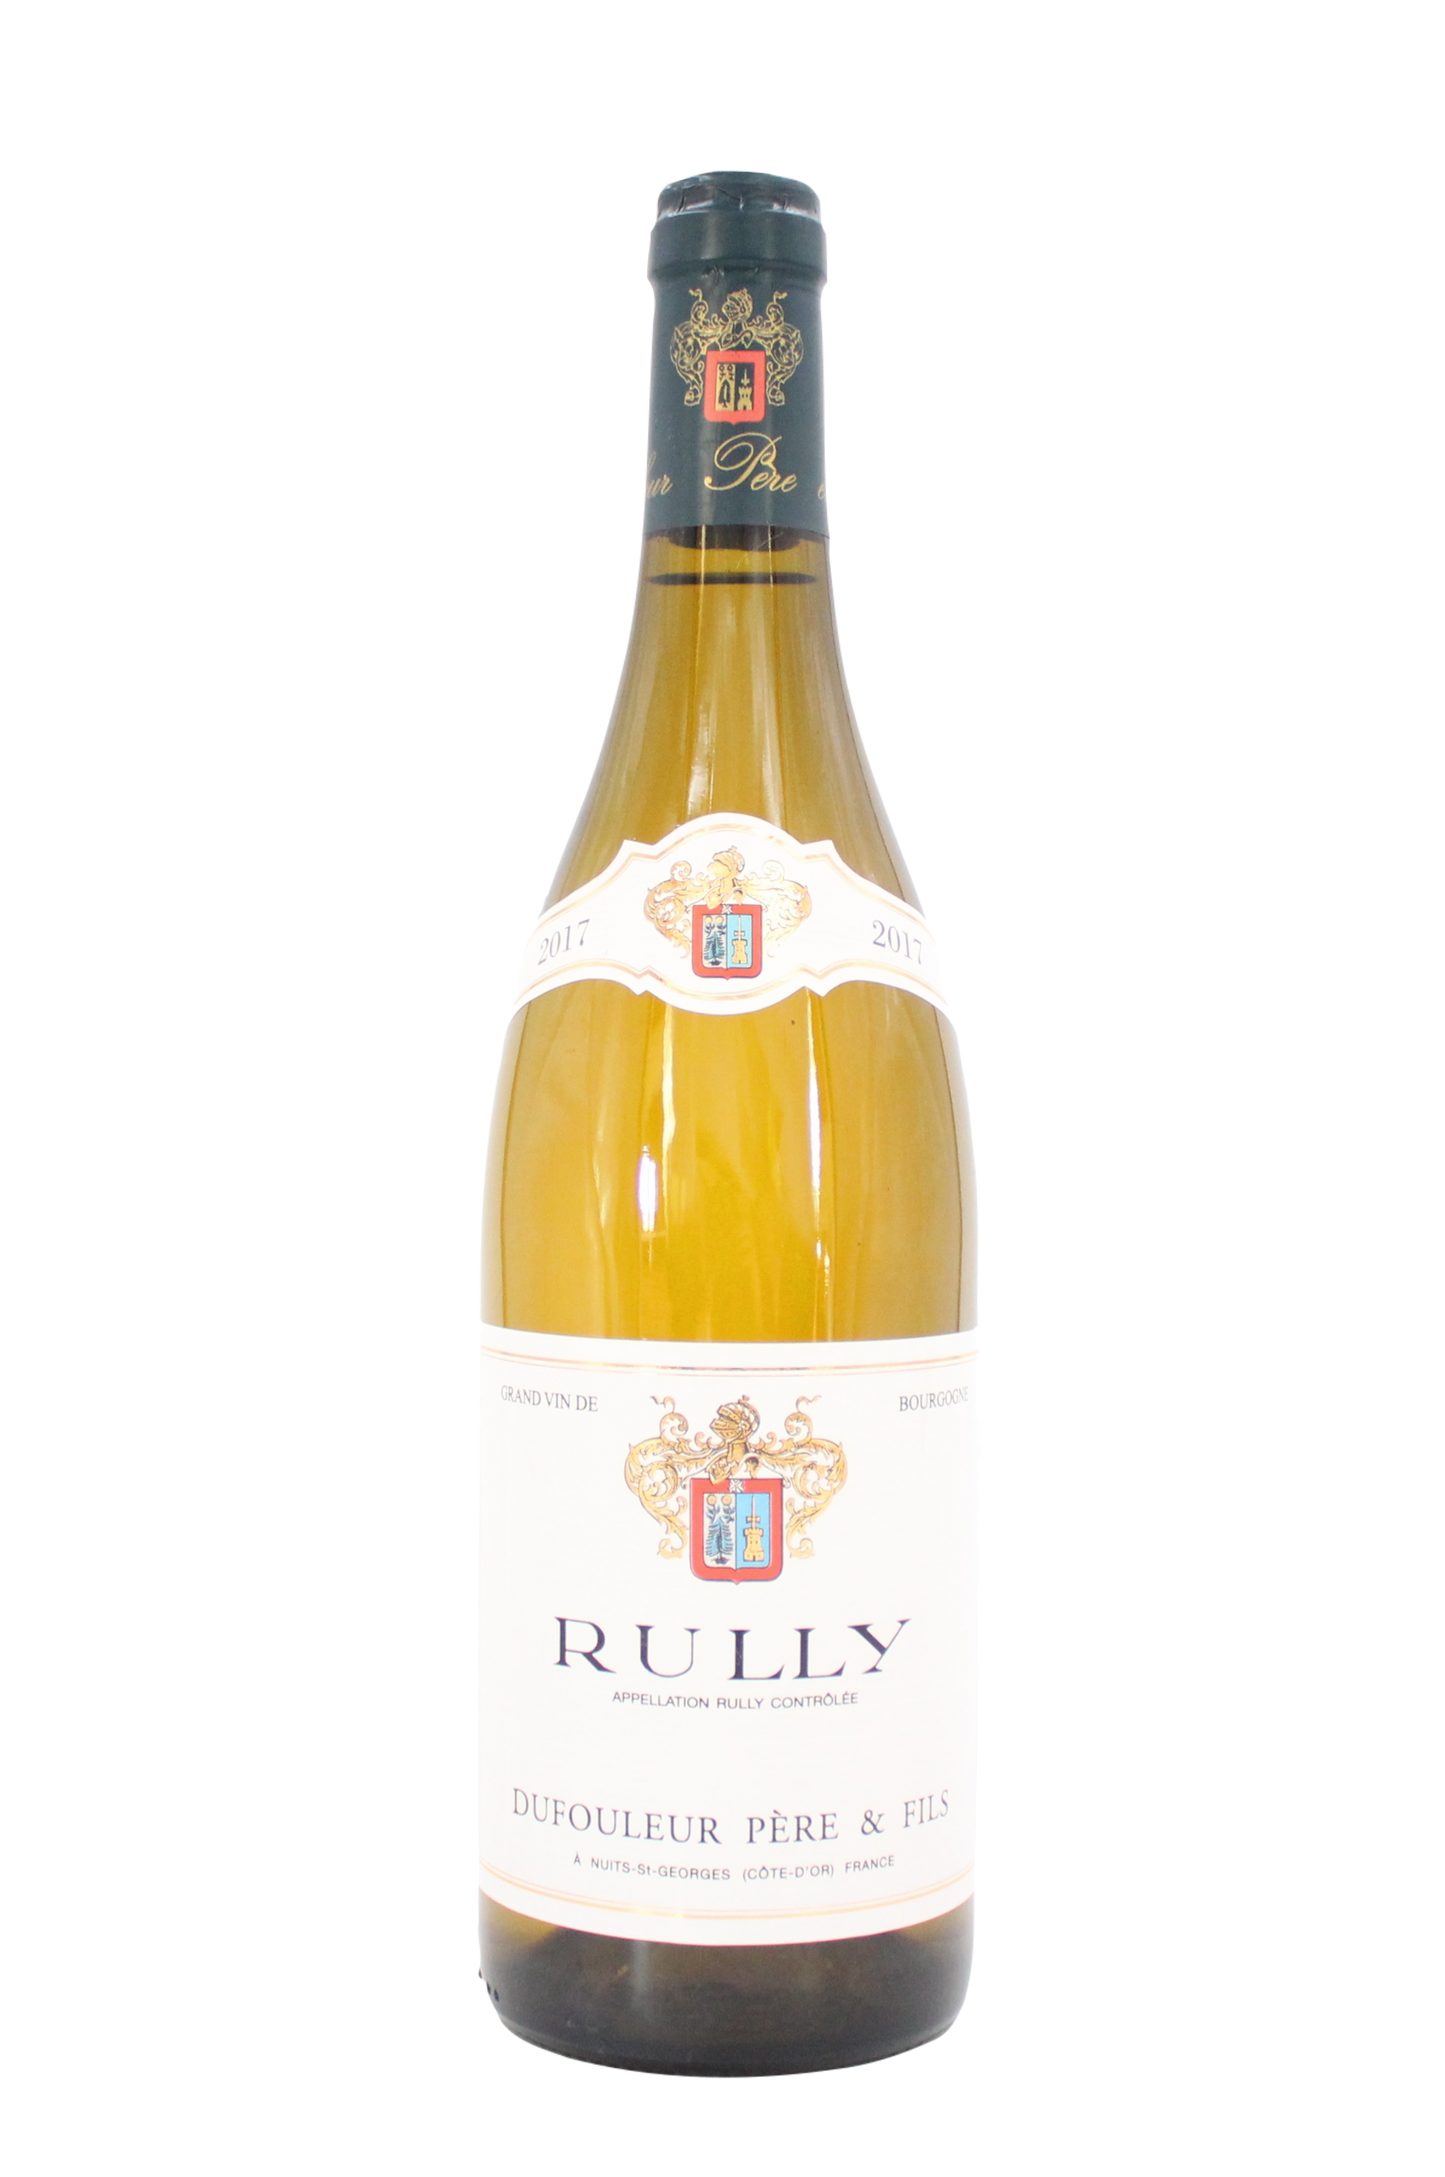 Dufouleur Pere & Fils Rully 2017